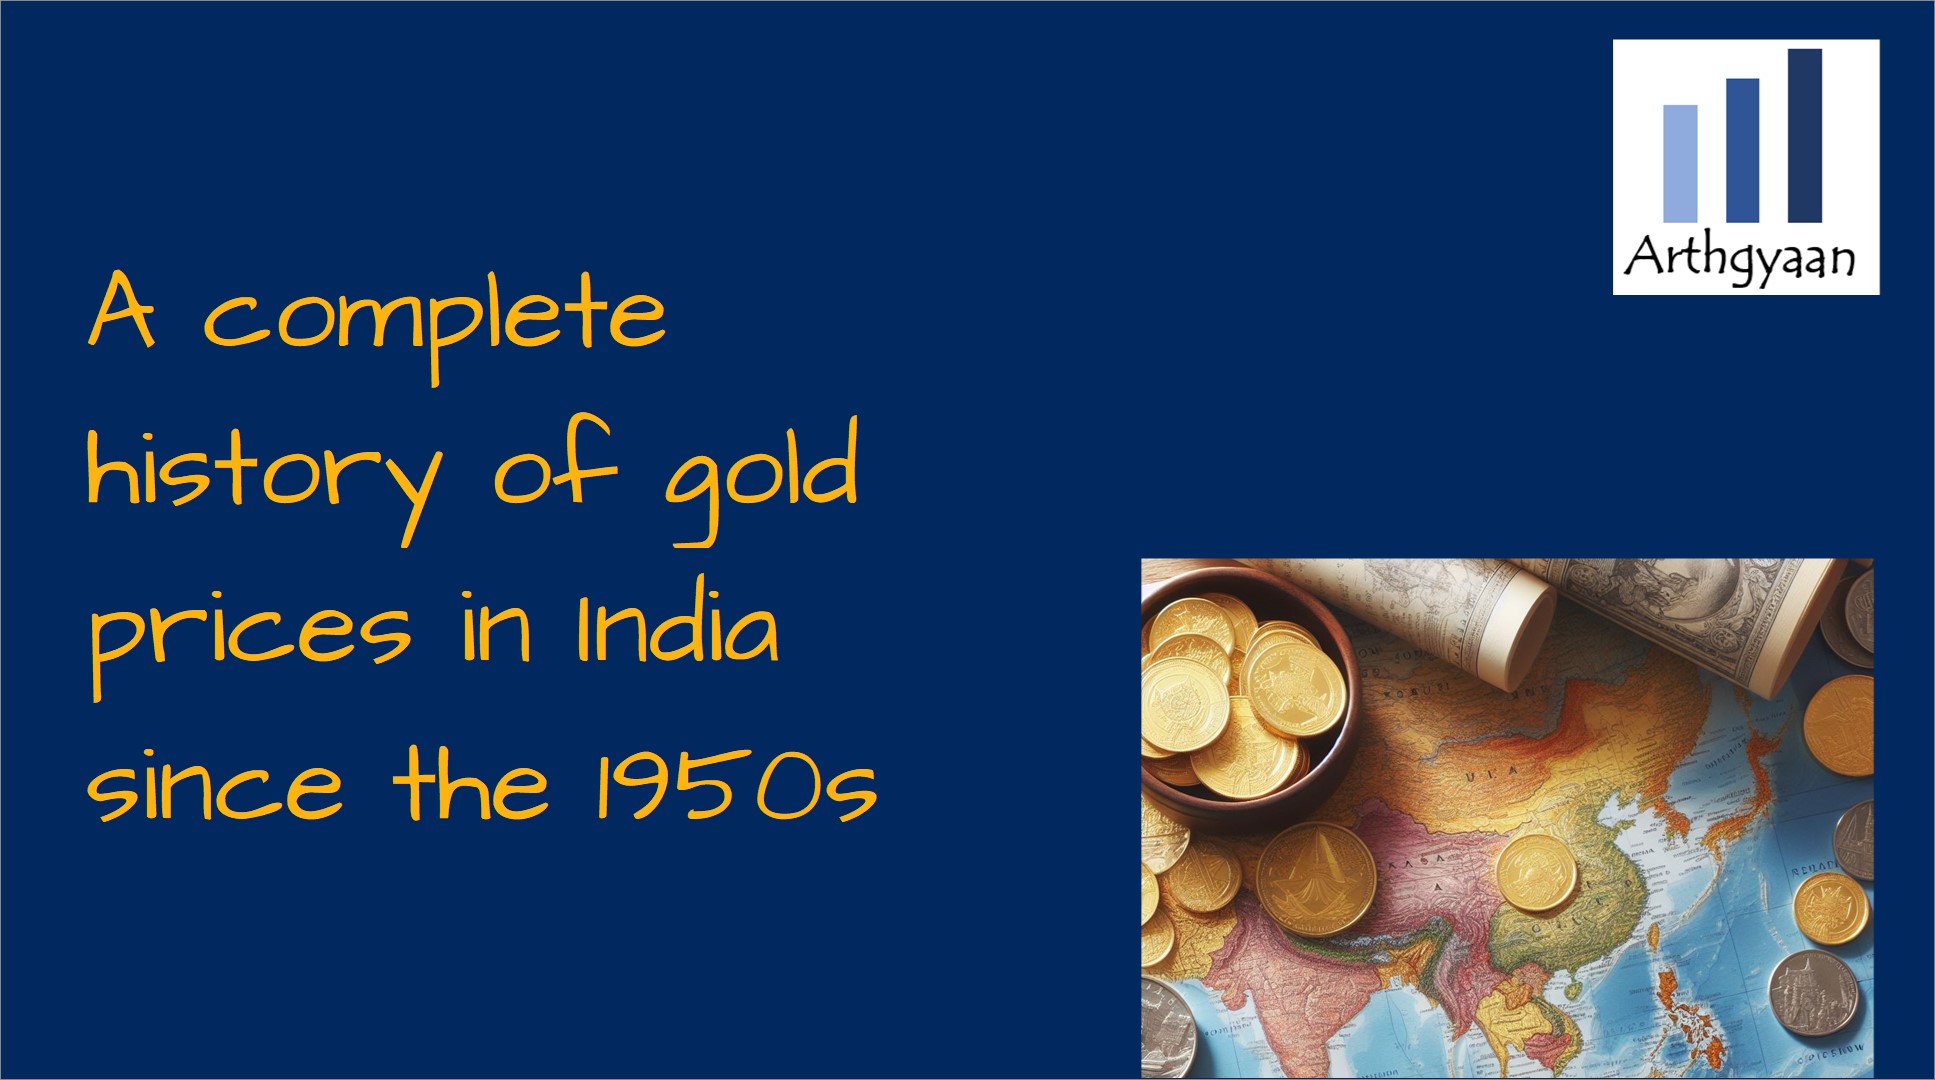 A complete history of gold prices in India since the 1950s